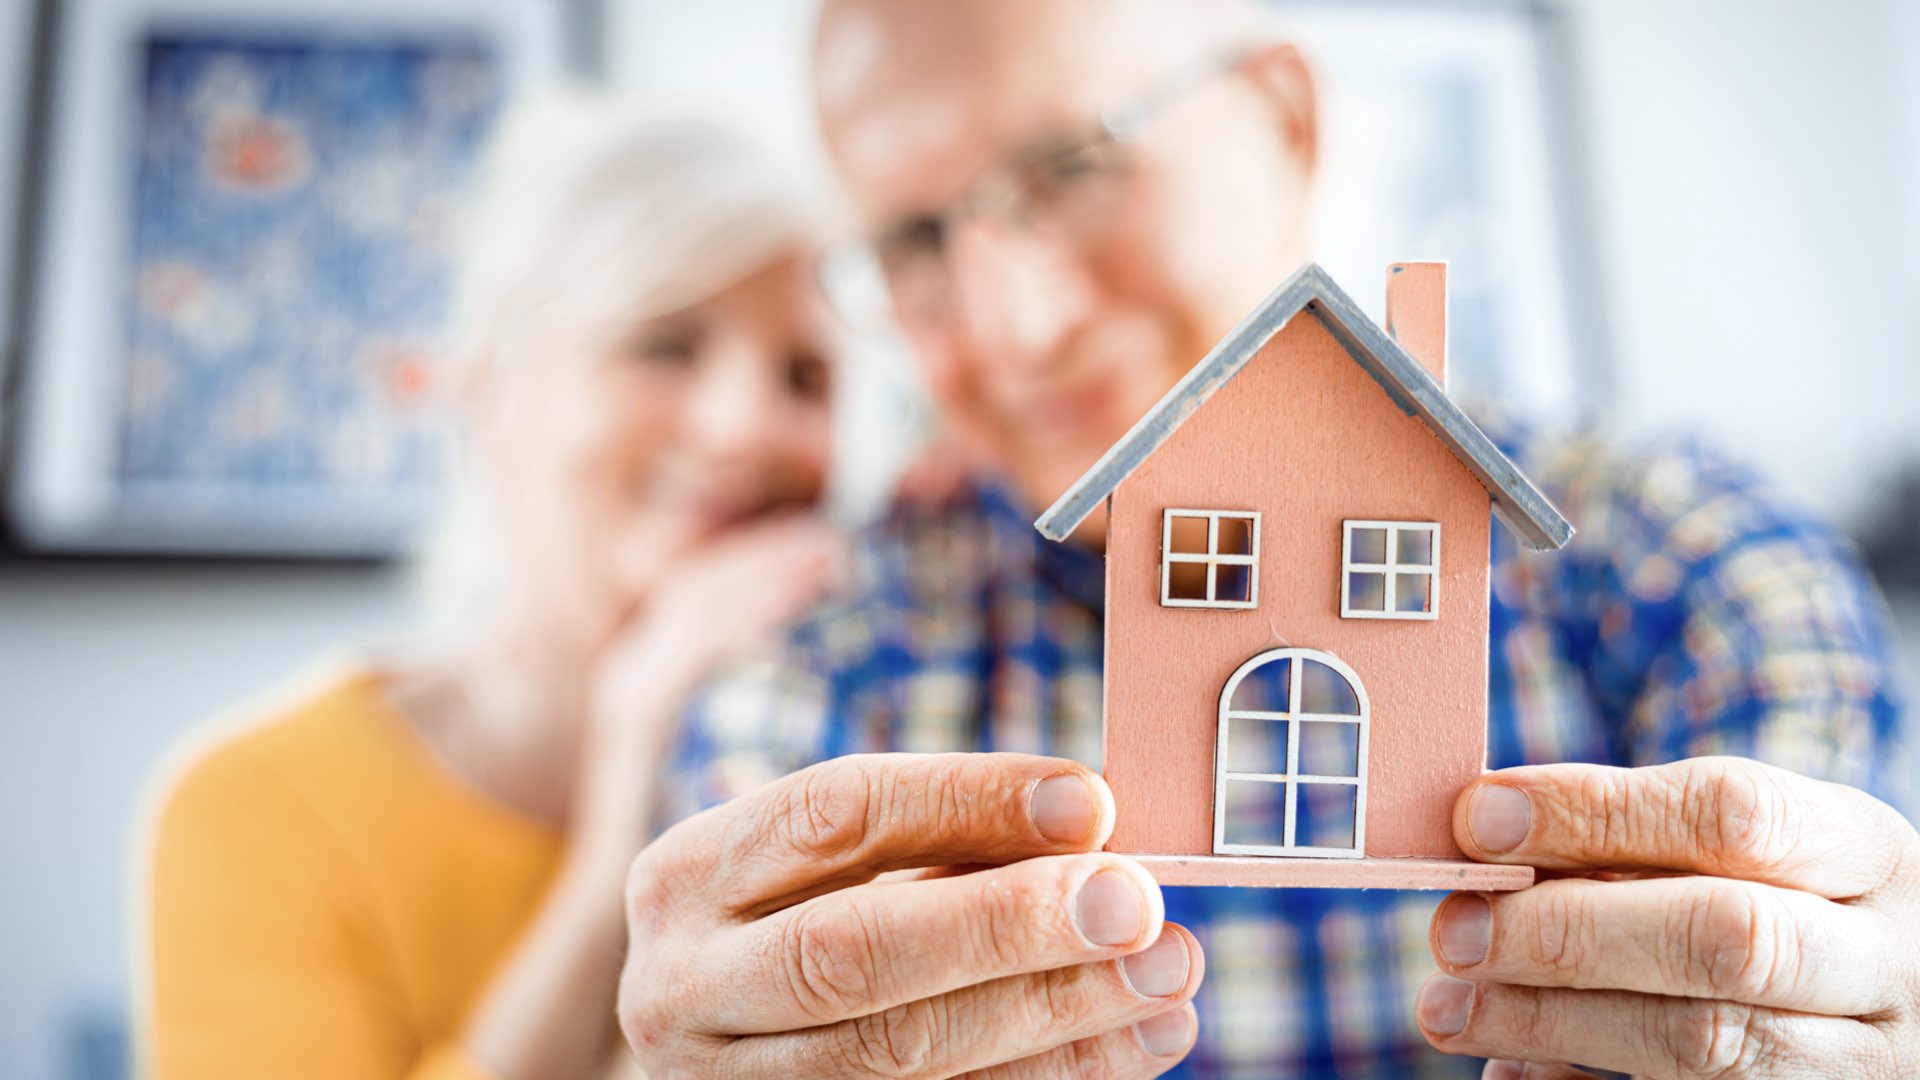  The good is many older homeowners may find their solution literally right above their heads and in the walls that surround them. Where unemployment benefits and a loss of income create a cashflow crisis reverse mortgages may increasingly become the logical solution